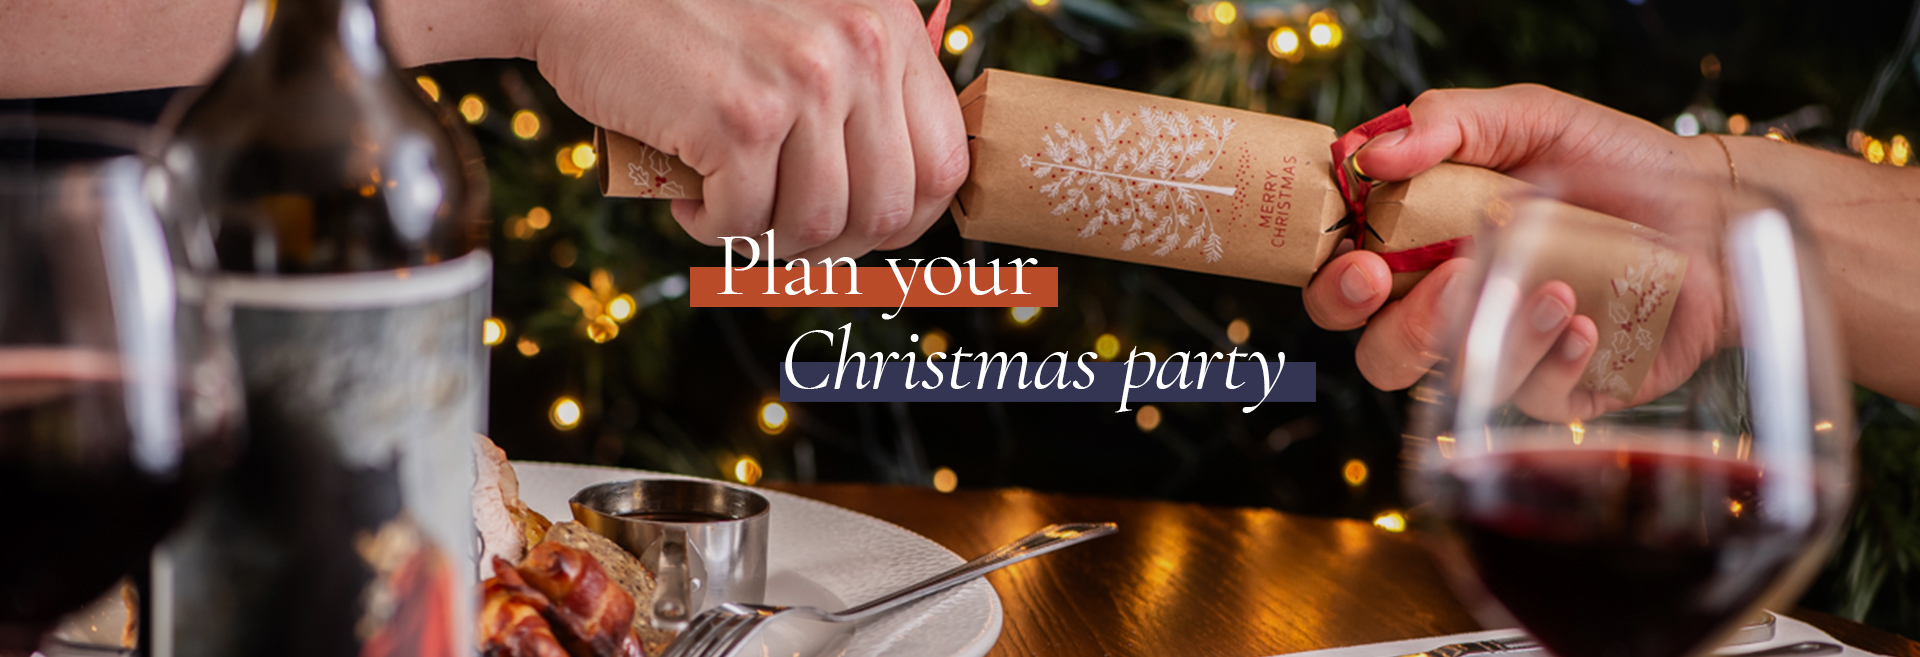 Christmas party at The Queen's Arms